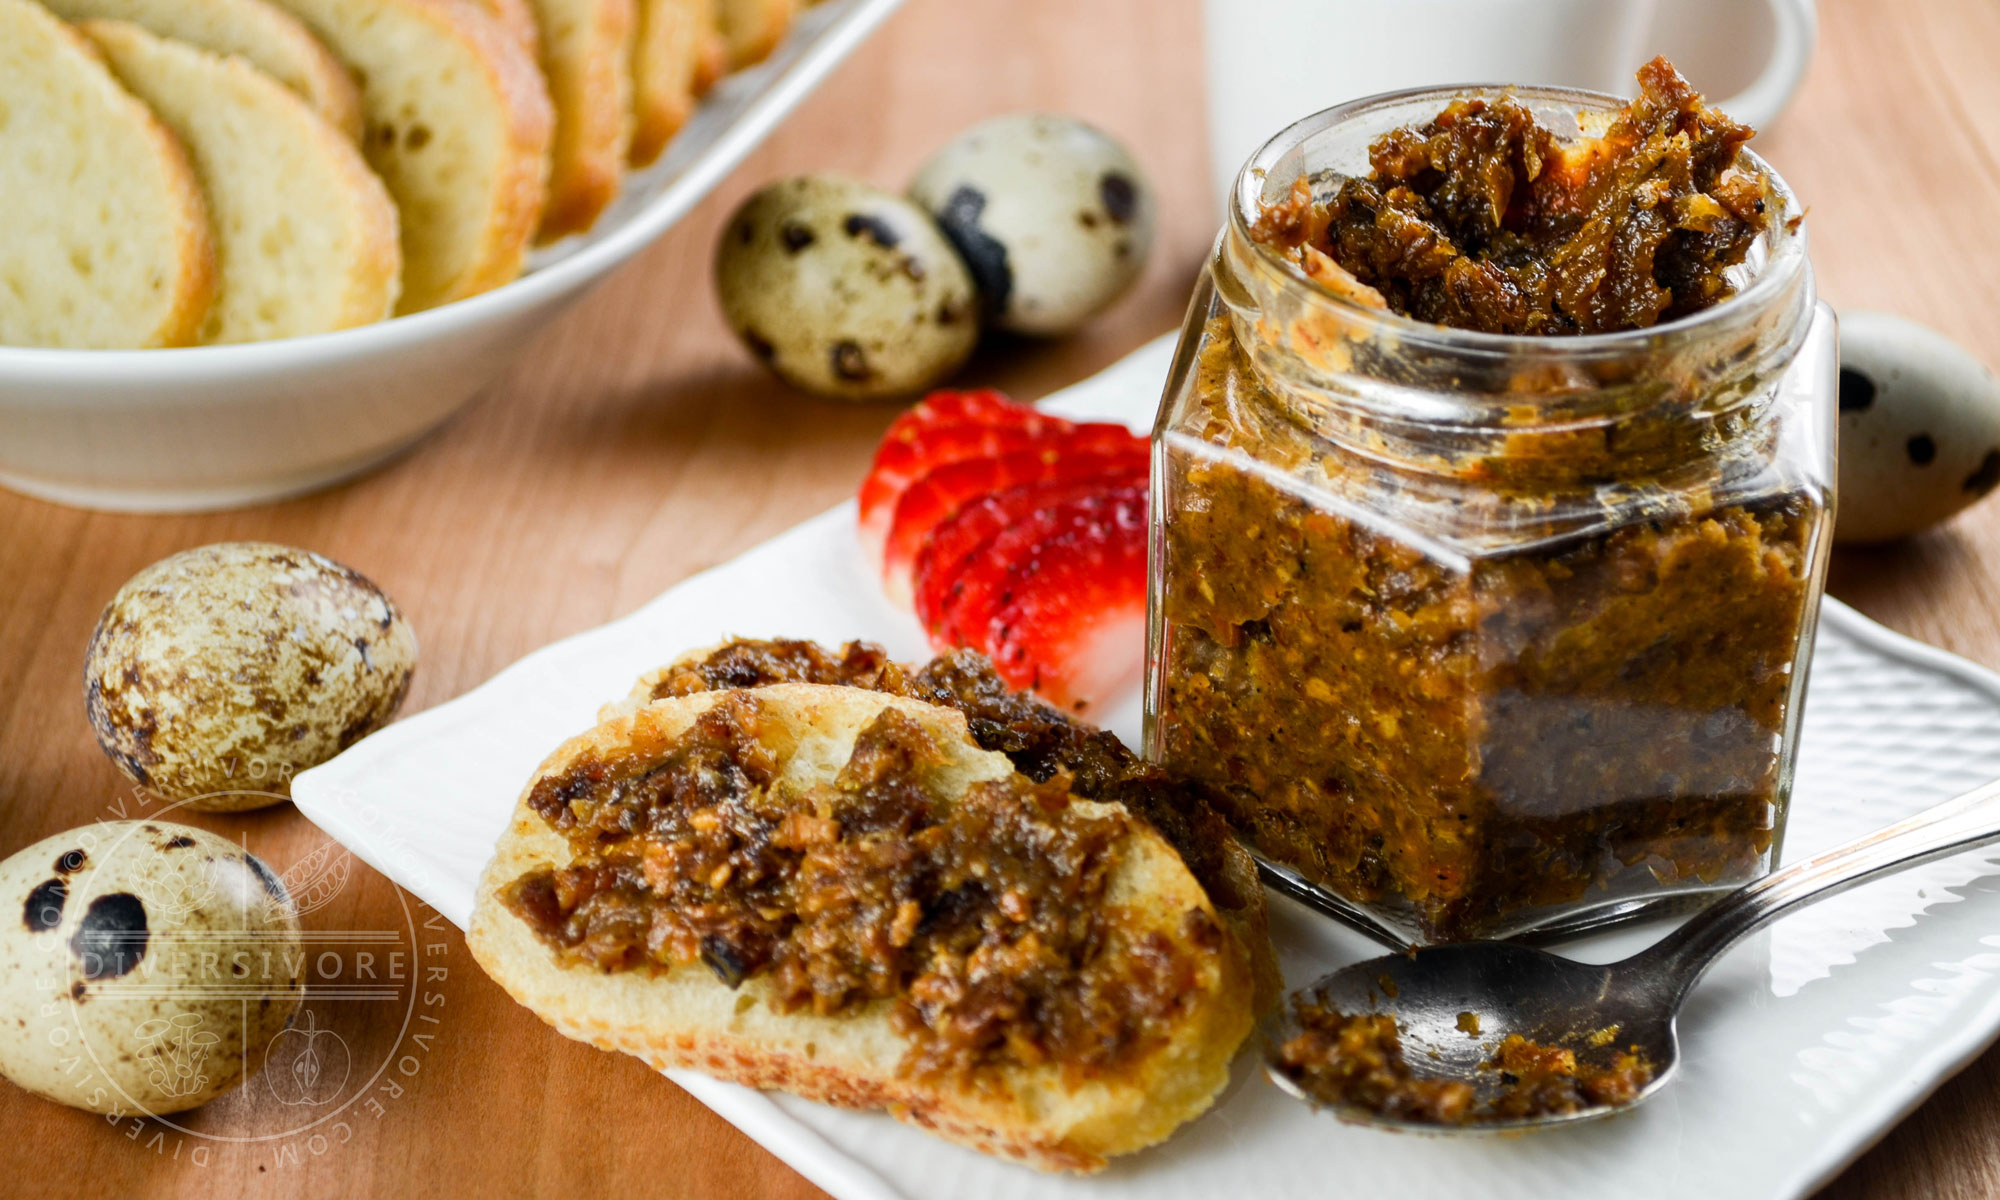 Bacon marmalade in a hexagonal glass jar with a spoon, bread, strawberries, and scattered quail eggs